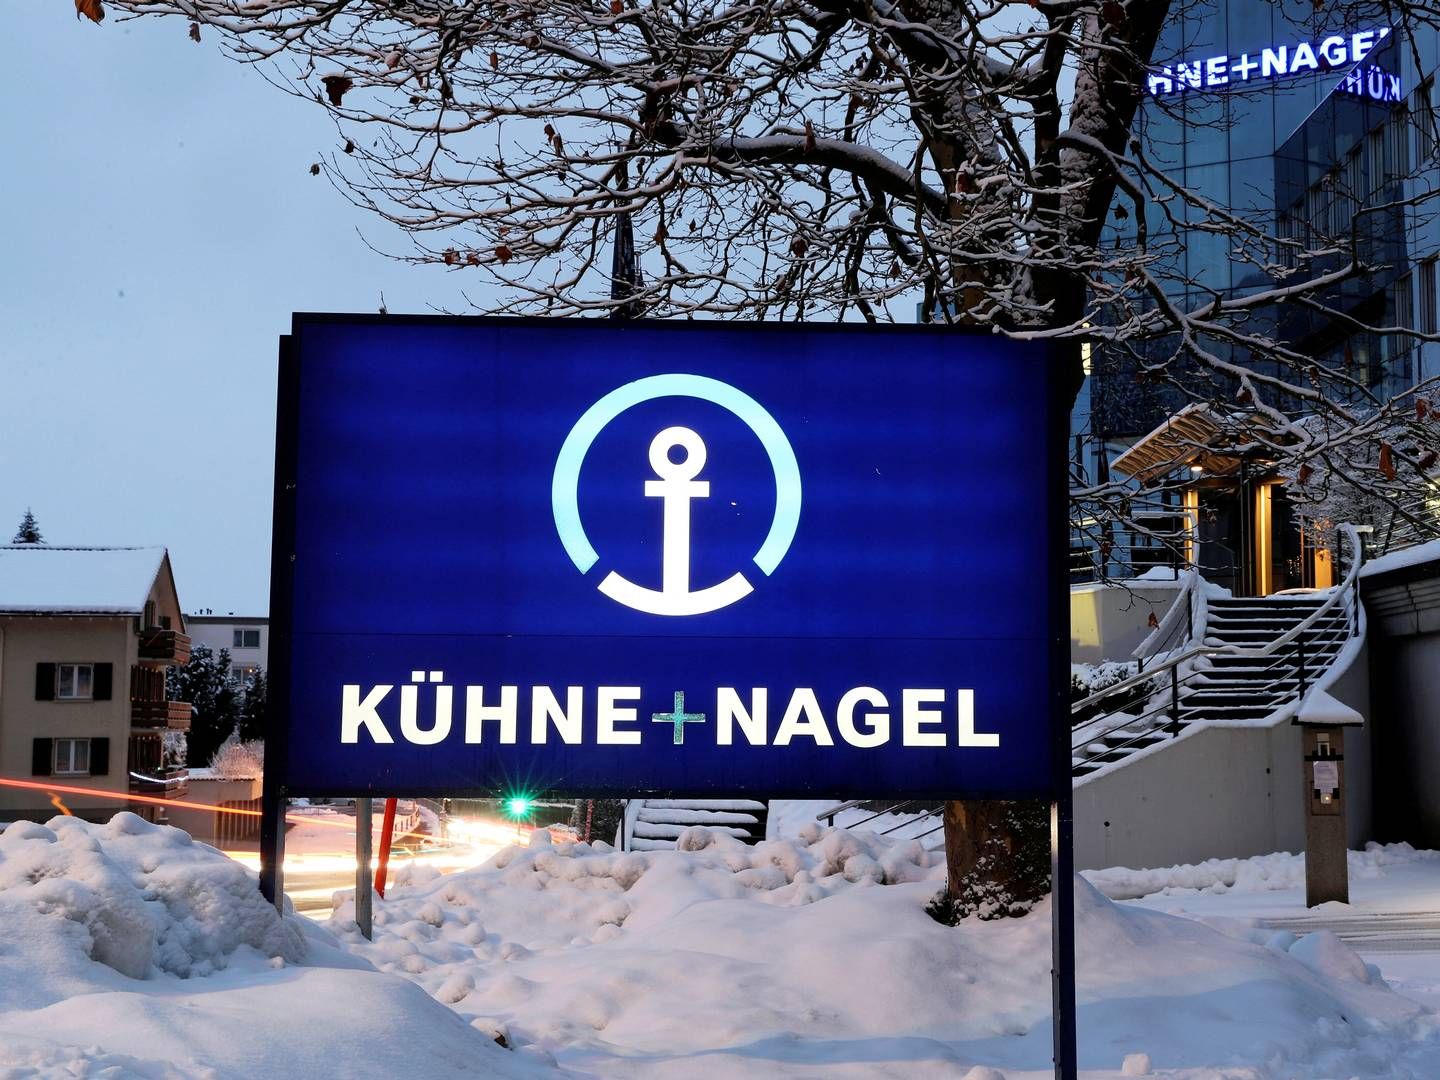 ”With the elimination of regional management levels, the Kuehne+Nagel Group is streamlining its organizational structure,” says chairman Joerg Wolle. | Photo: Arnd Wiegmann/Reuters/Ritzau Scanpix